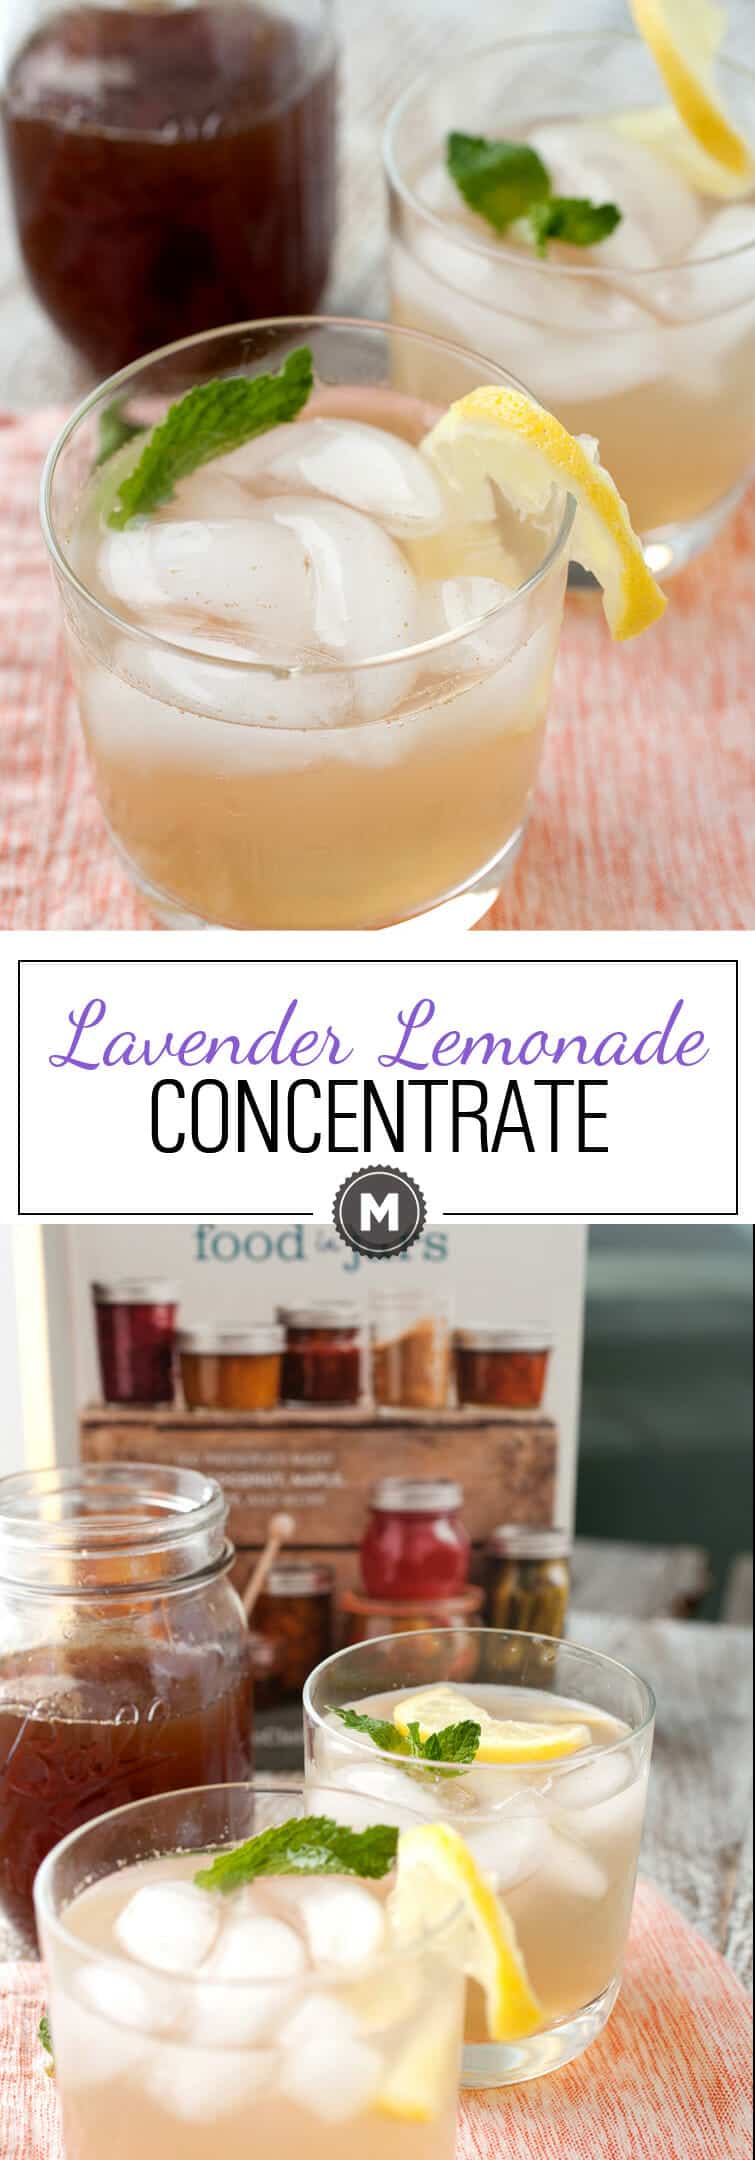 Lavender Lemonade Concentrate: A tangy and just-sweet-enough concentrate that's great for a glass of lemonade or adult beverage. You can can the concentrate, but I always drink it too fast for it to be a concern! From the cookbook Naturally Sweet Food in jars! | macheesmo.com